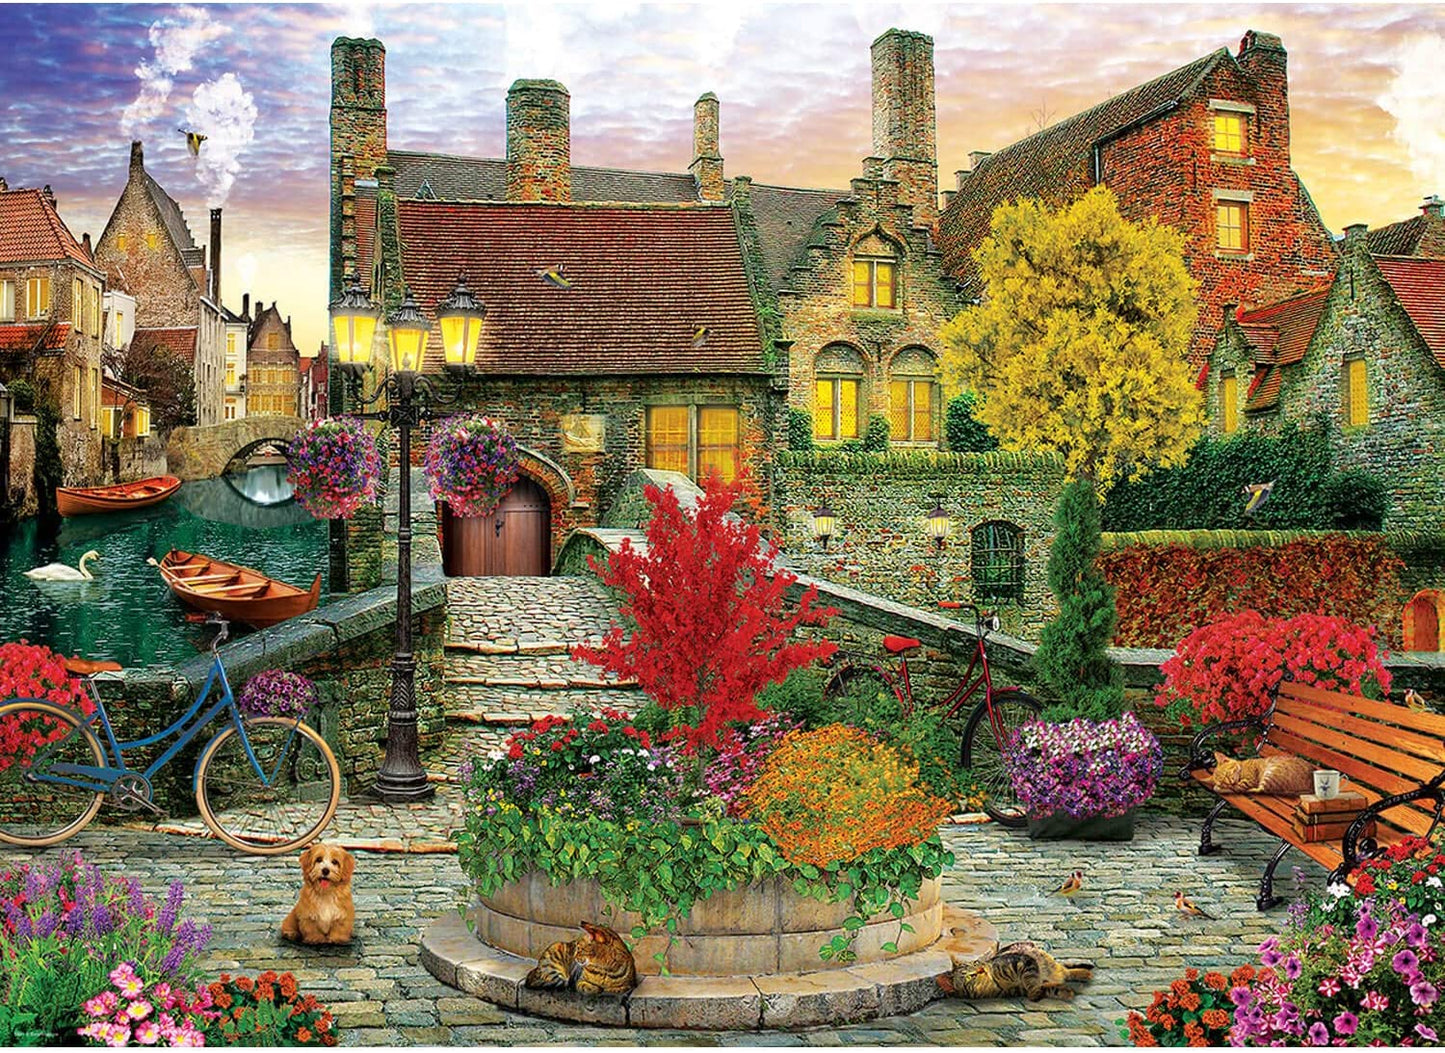 Eurographics - Old Town Living - 1000 Piece Jigsaw Puzzle